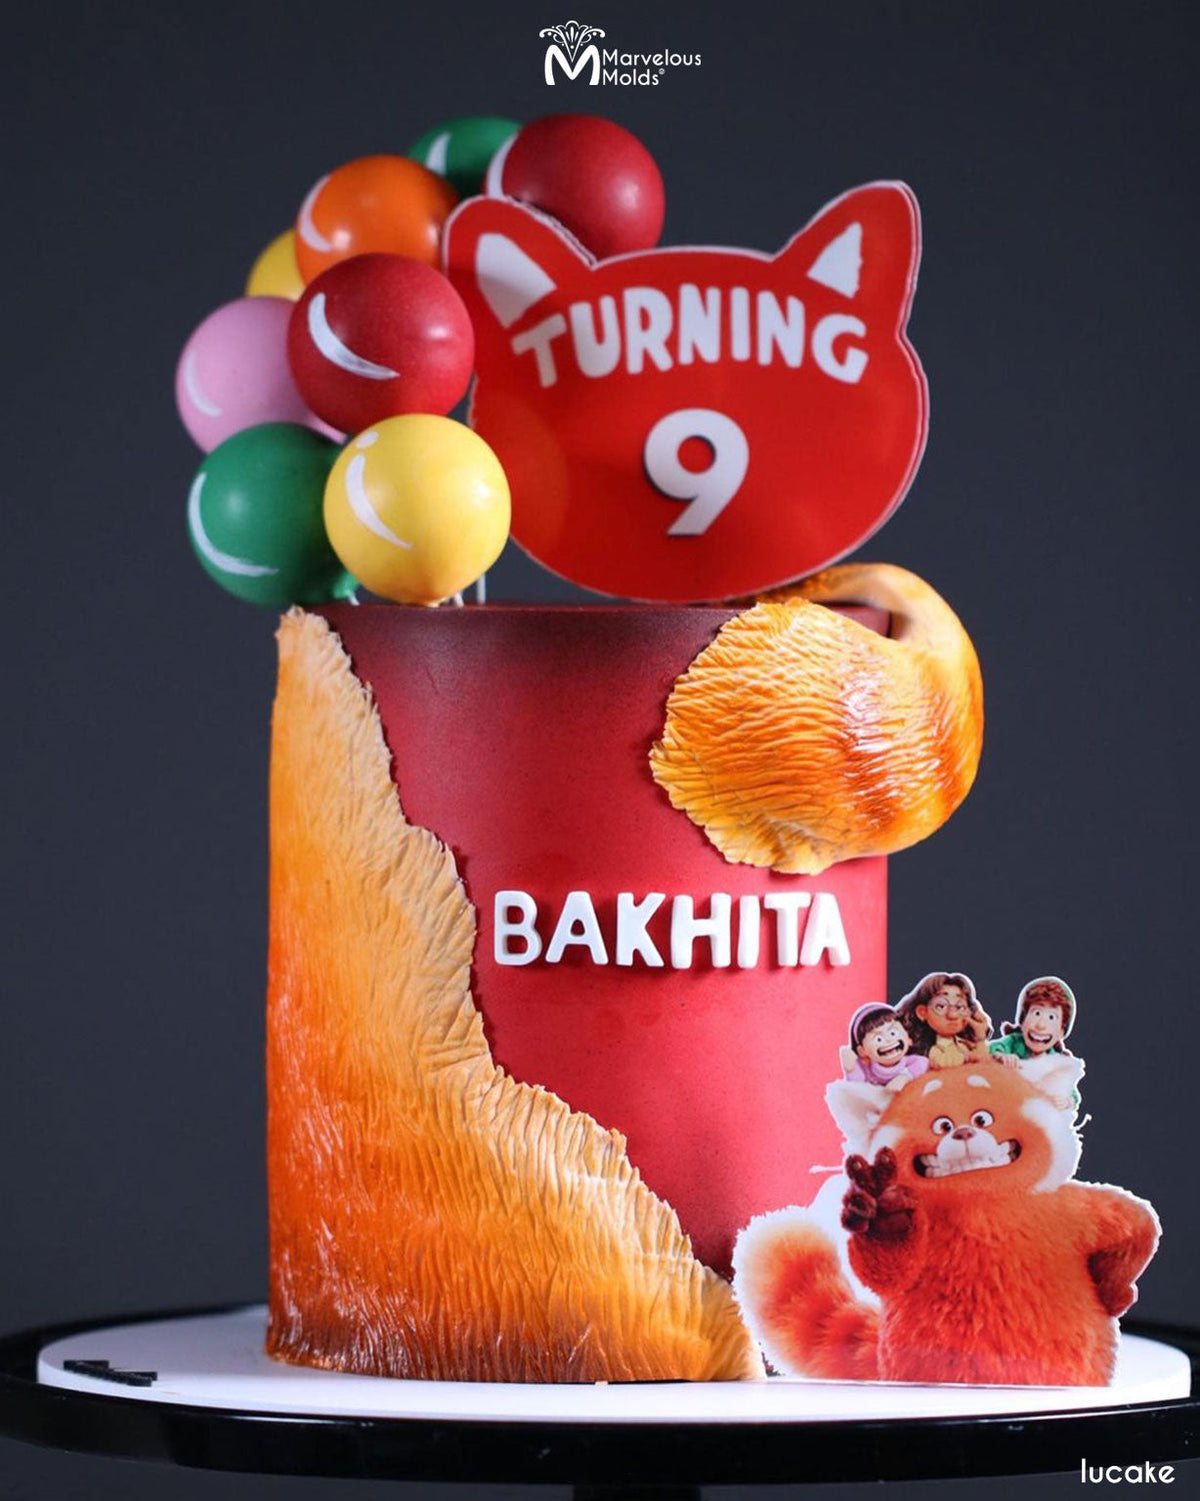 Turning Red Disney Movie Themed Birthday Cake Decorated with Marvelous Molds Long Fur Impression Mat